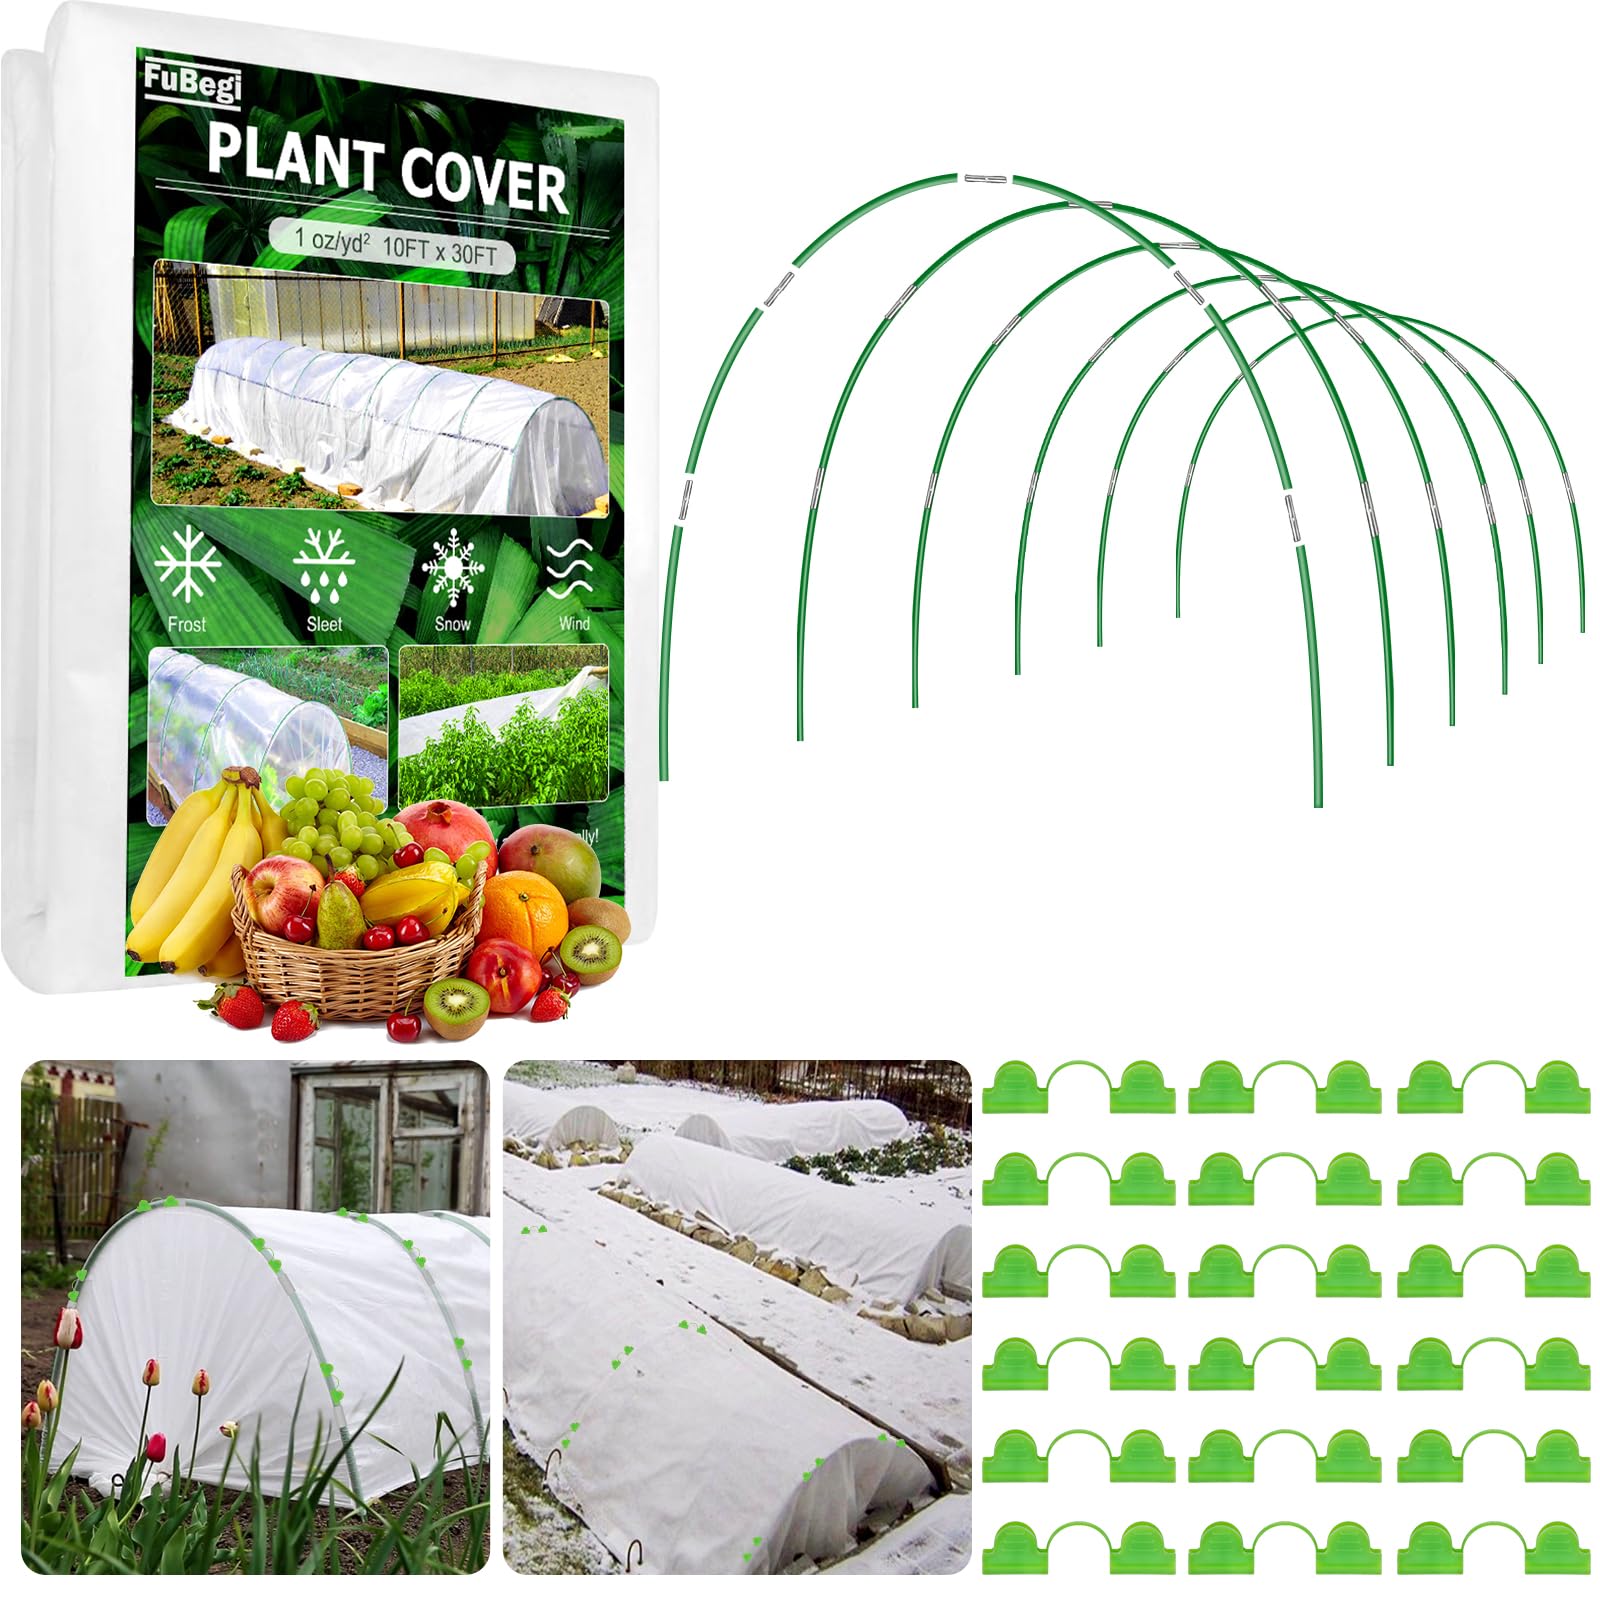 Garden Hoop Plant Cover Freeze Protection for Winter